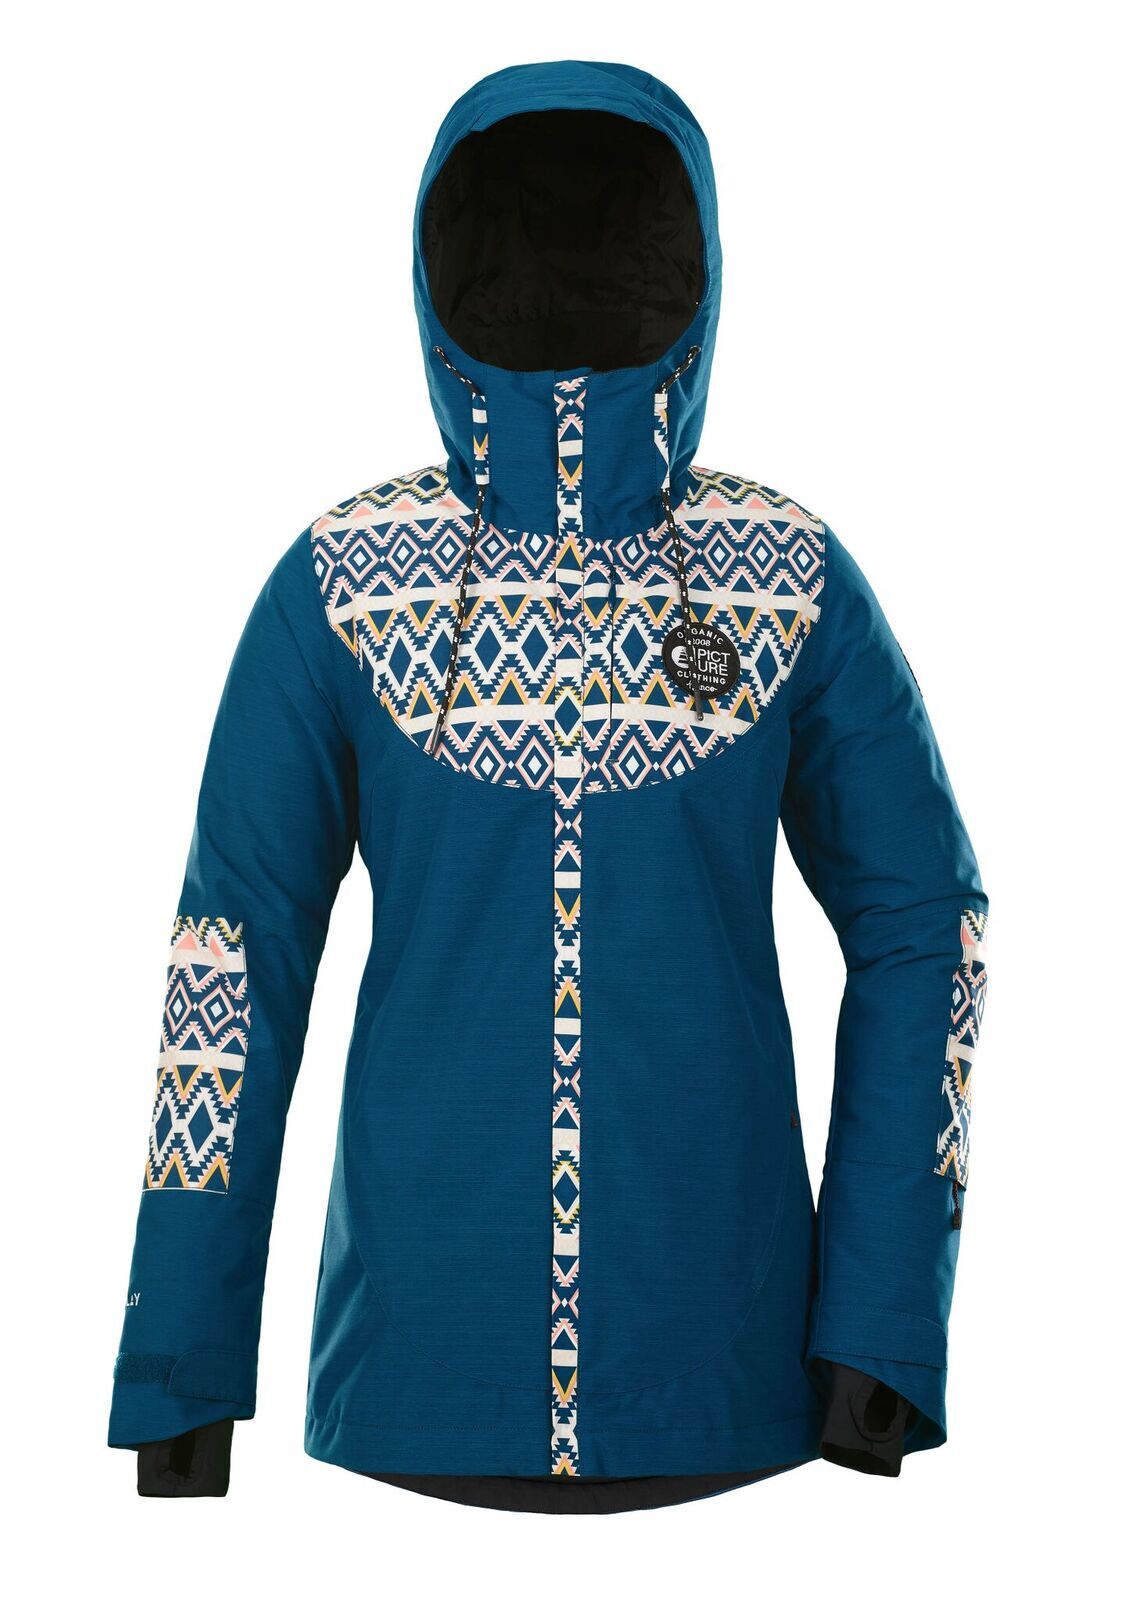 Picture Organic Clothing - Mineral - Ski jacket - Women's